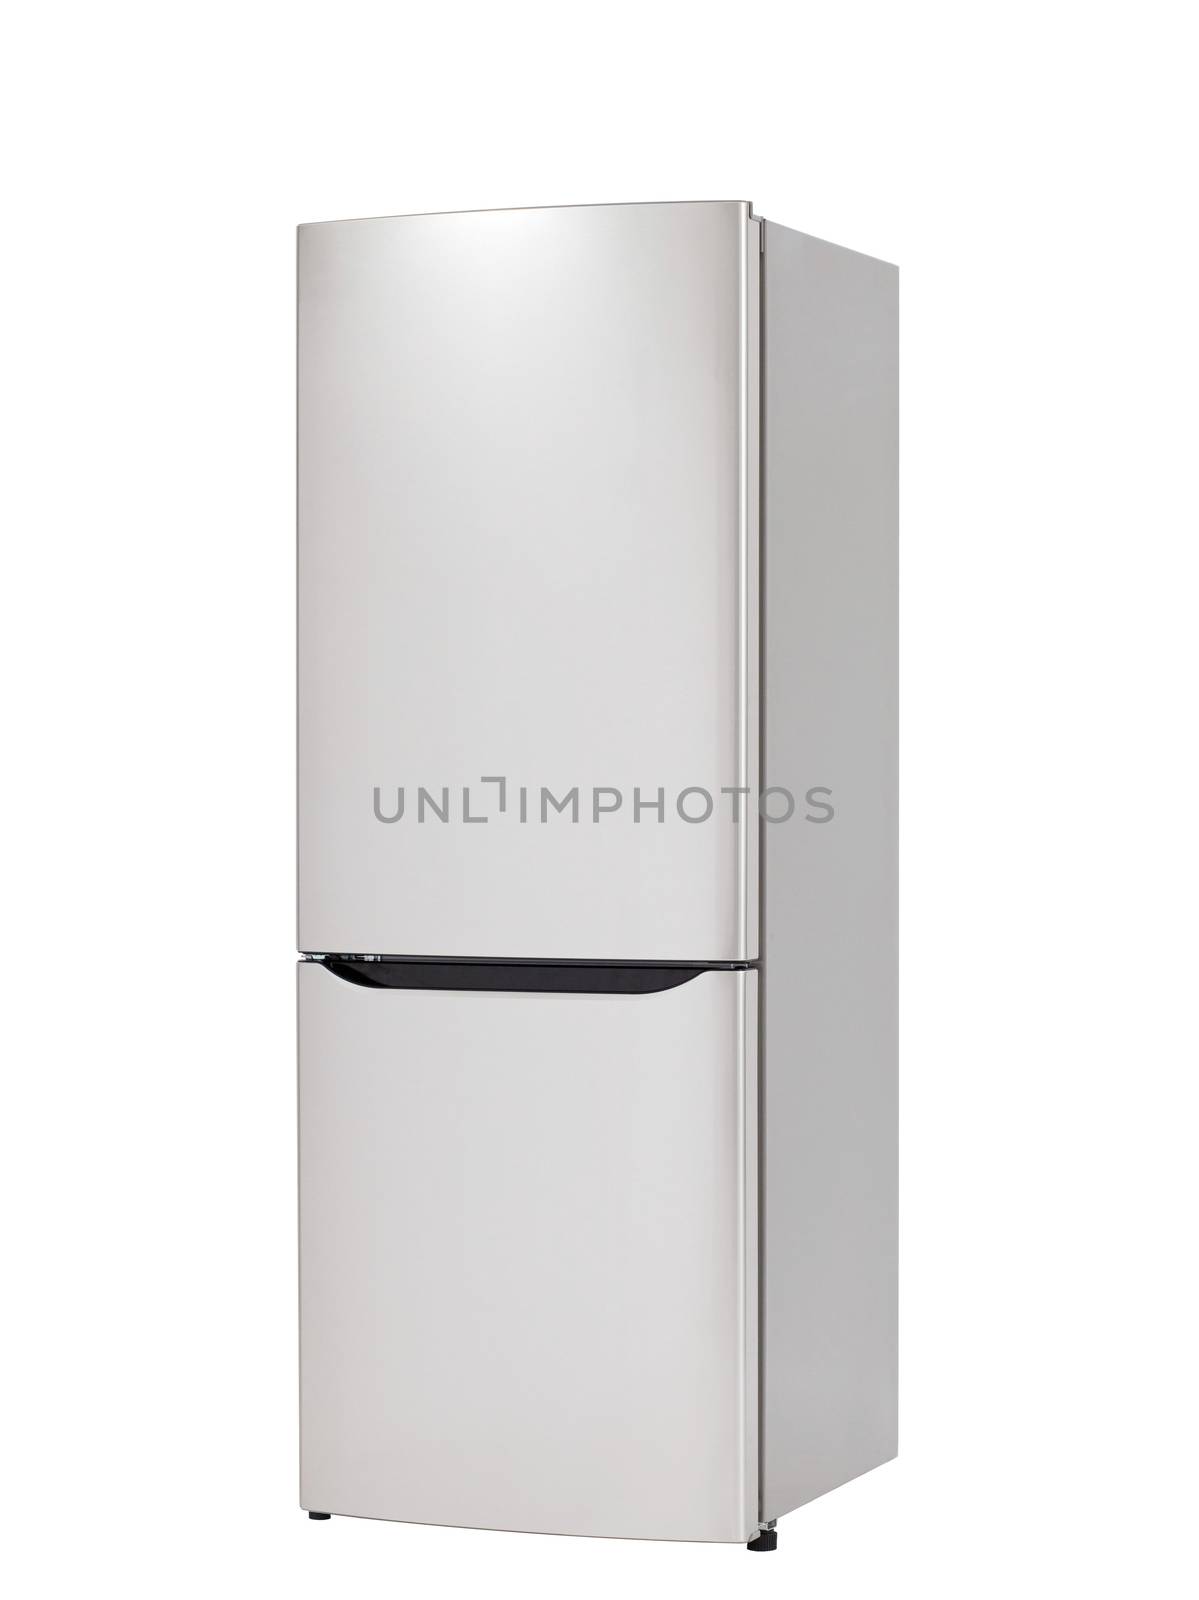 Modern refrigerator isolated on white background by ozaiachin